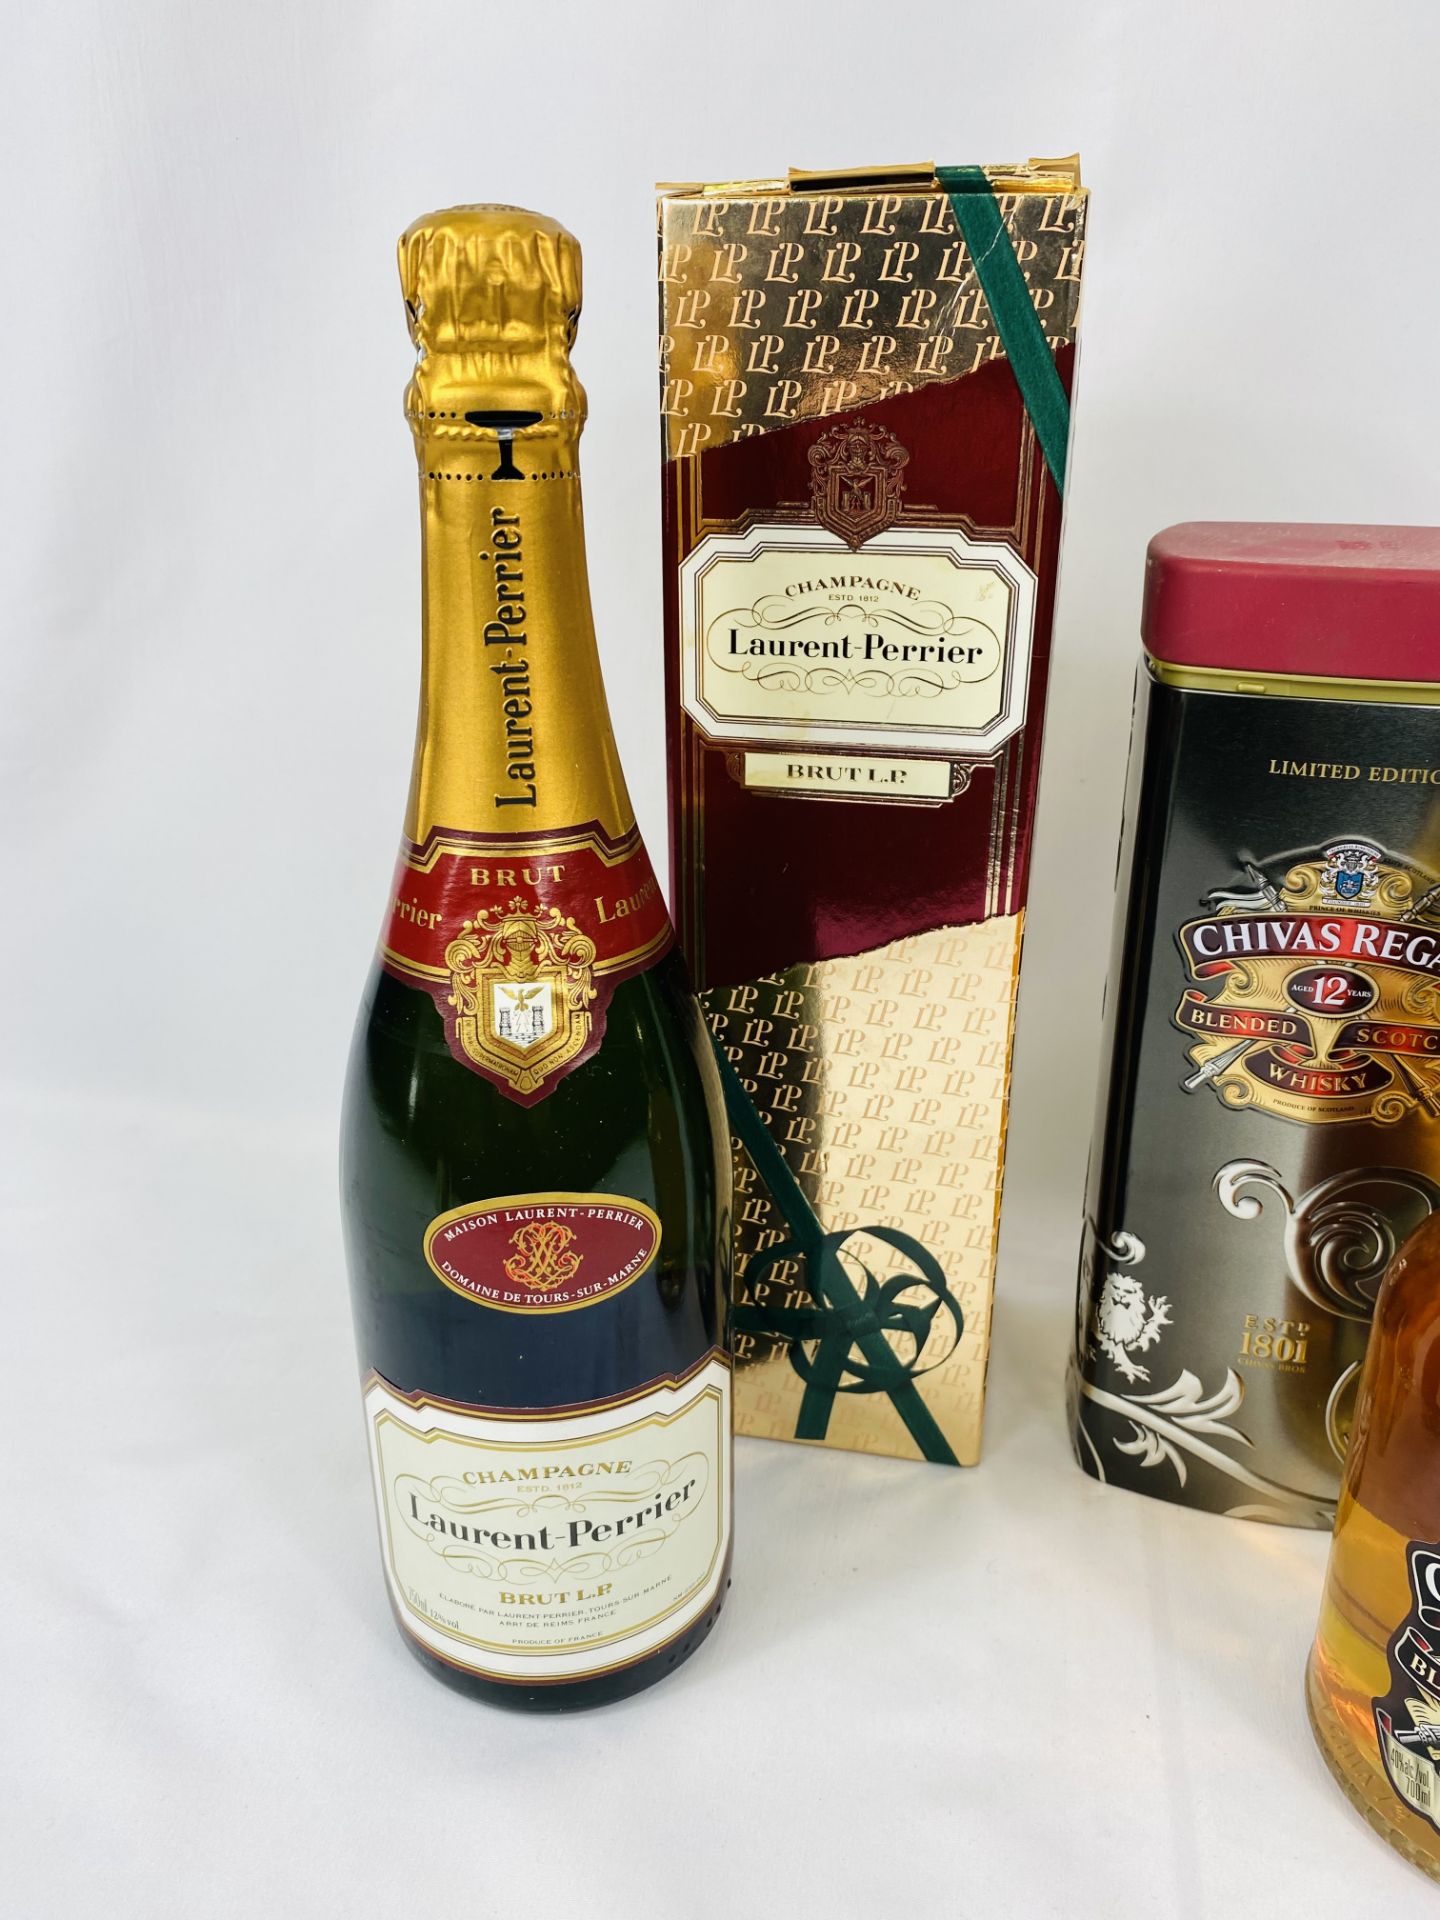 75cl bottle of Laurent Perrier champagne and a bottle of whisky - Image 3 of 4